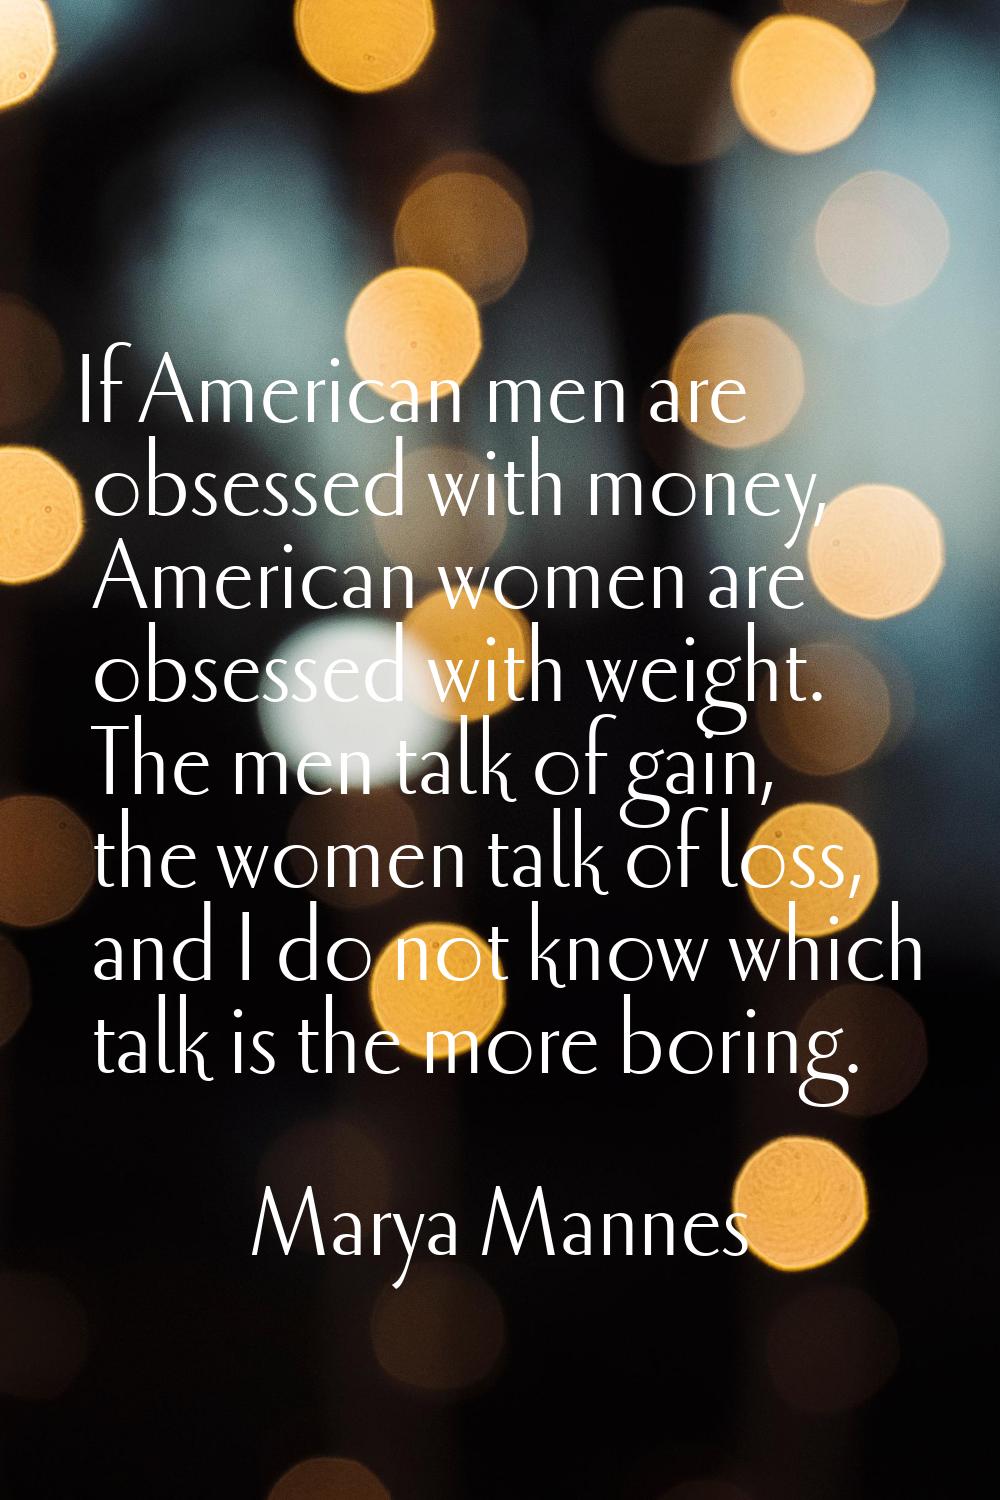 If American men are obsessed with money, American women are obsessed with weight. The men talk of g